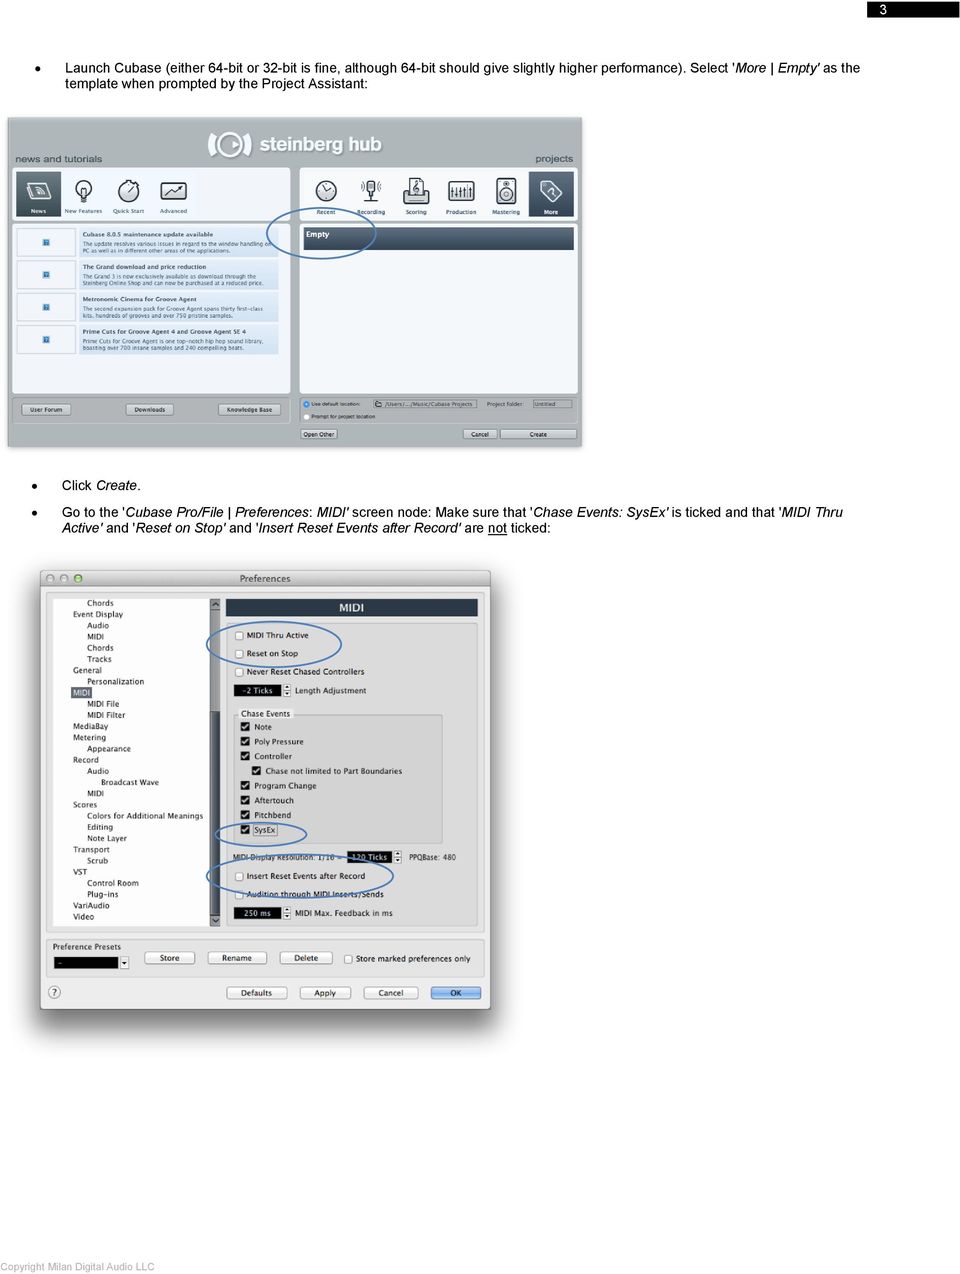 Select 'More Empty' as the template when prompted by the Project Assistant: Click Create.